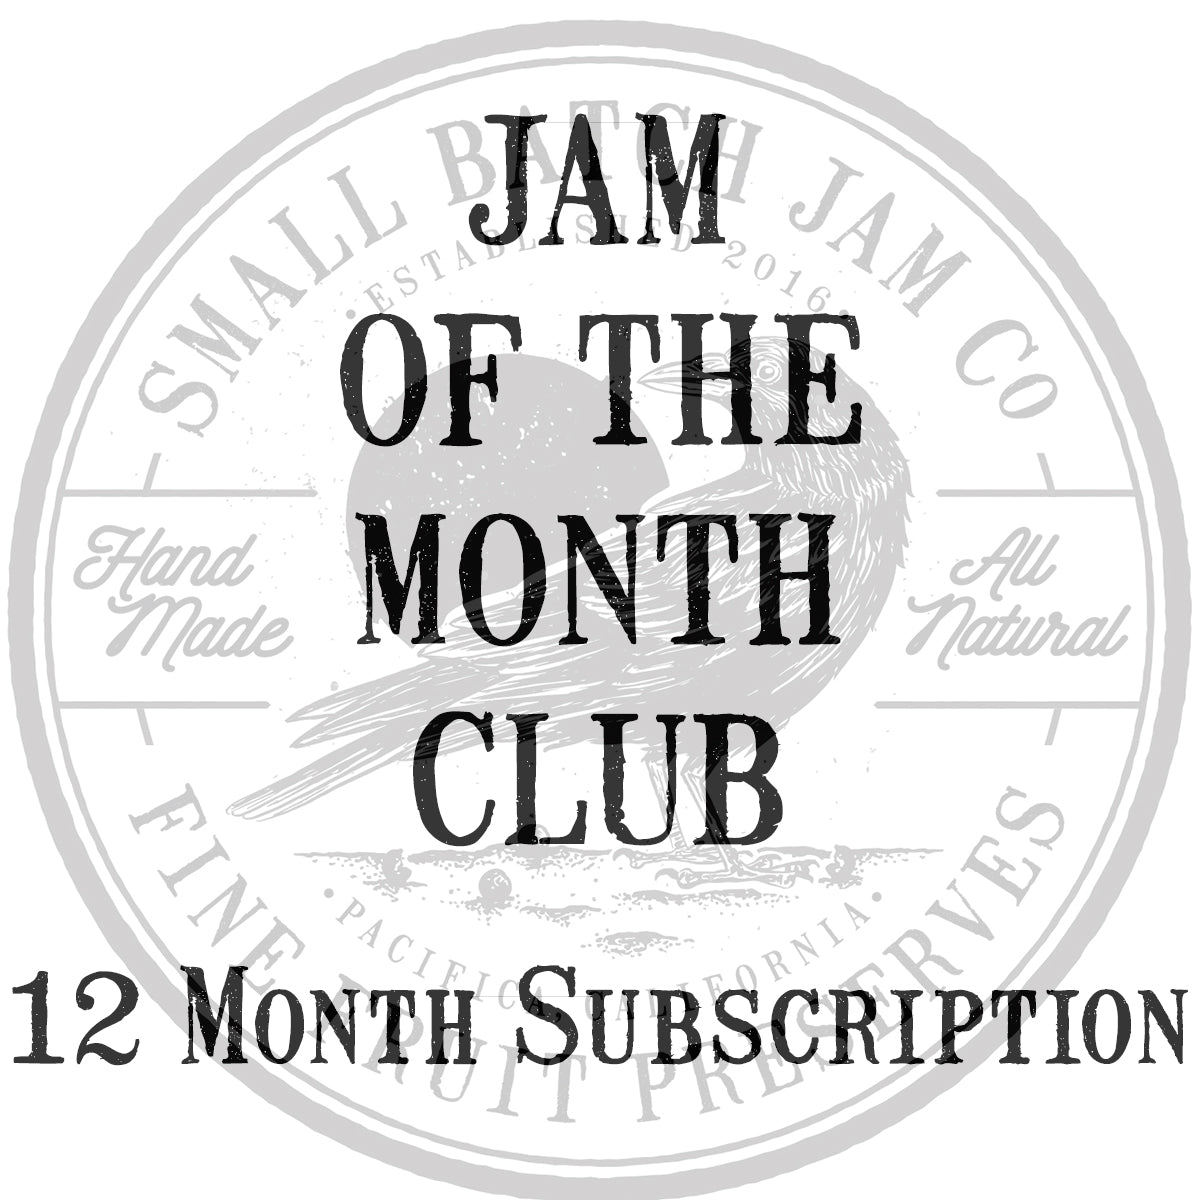 Jam Of The Month Club - 12 Month Subscription - Small Batch Jam Co